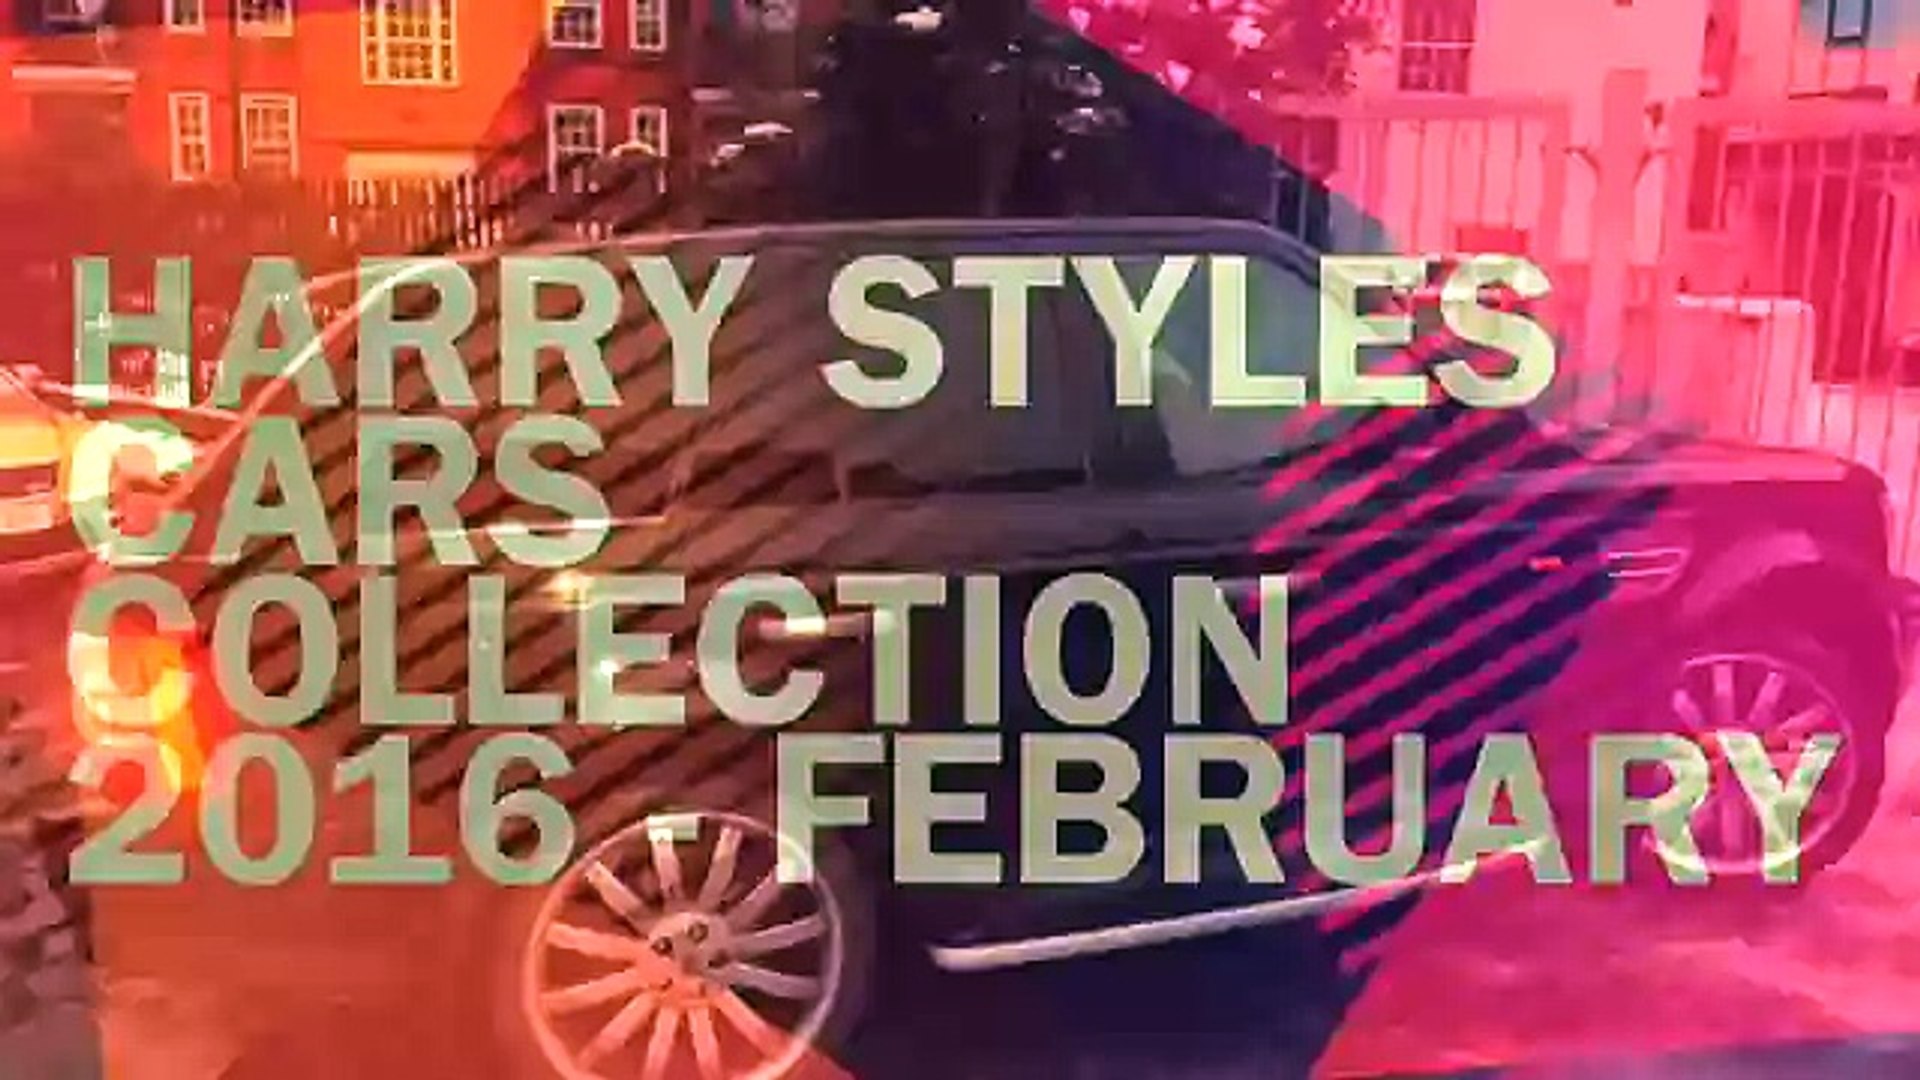 Harry Styles Cars Collection 2016 March